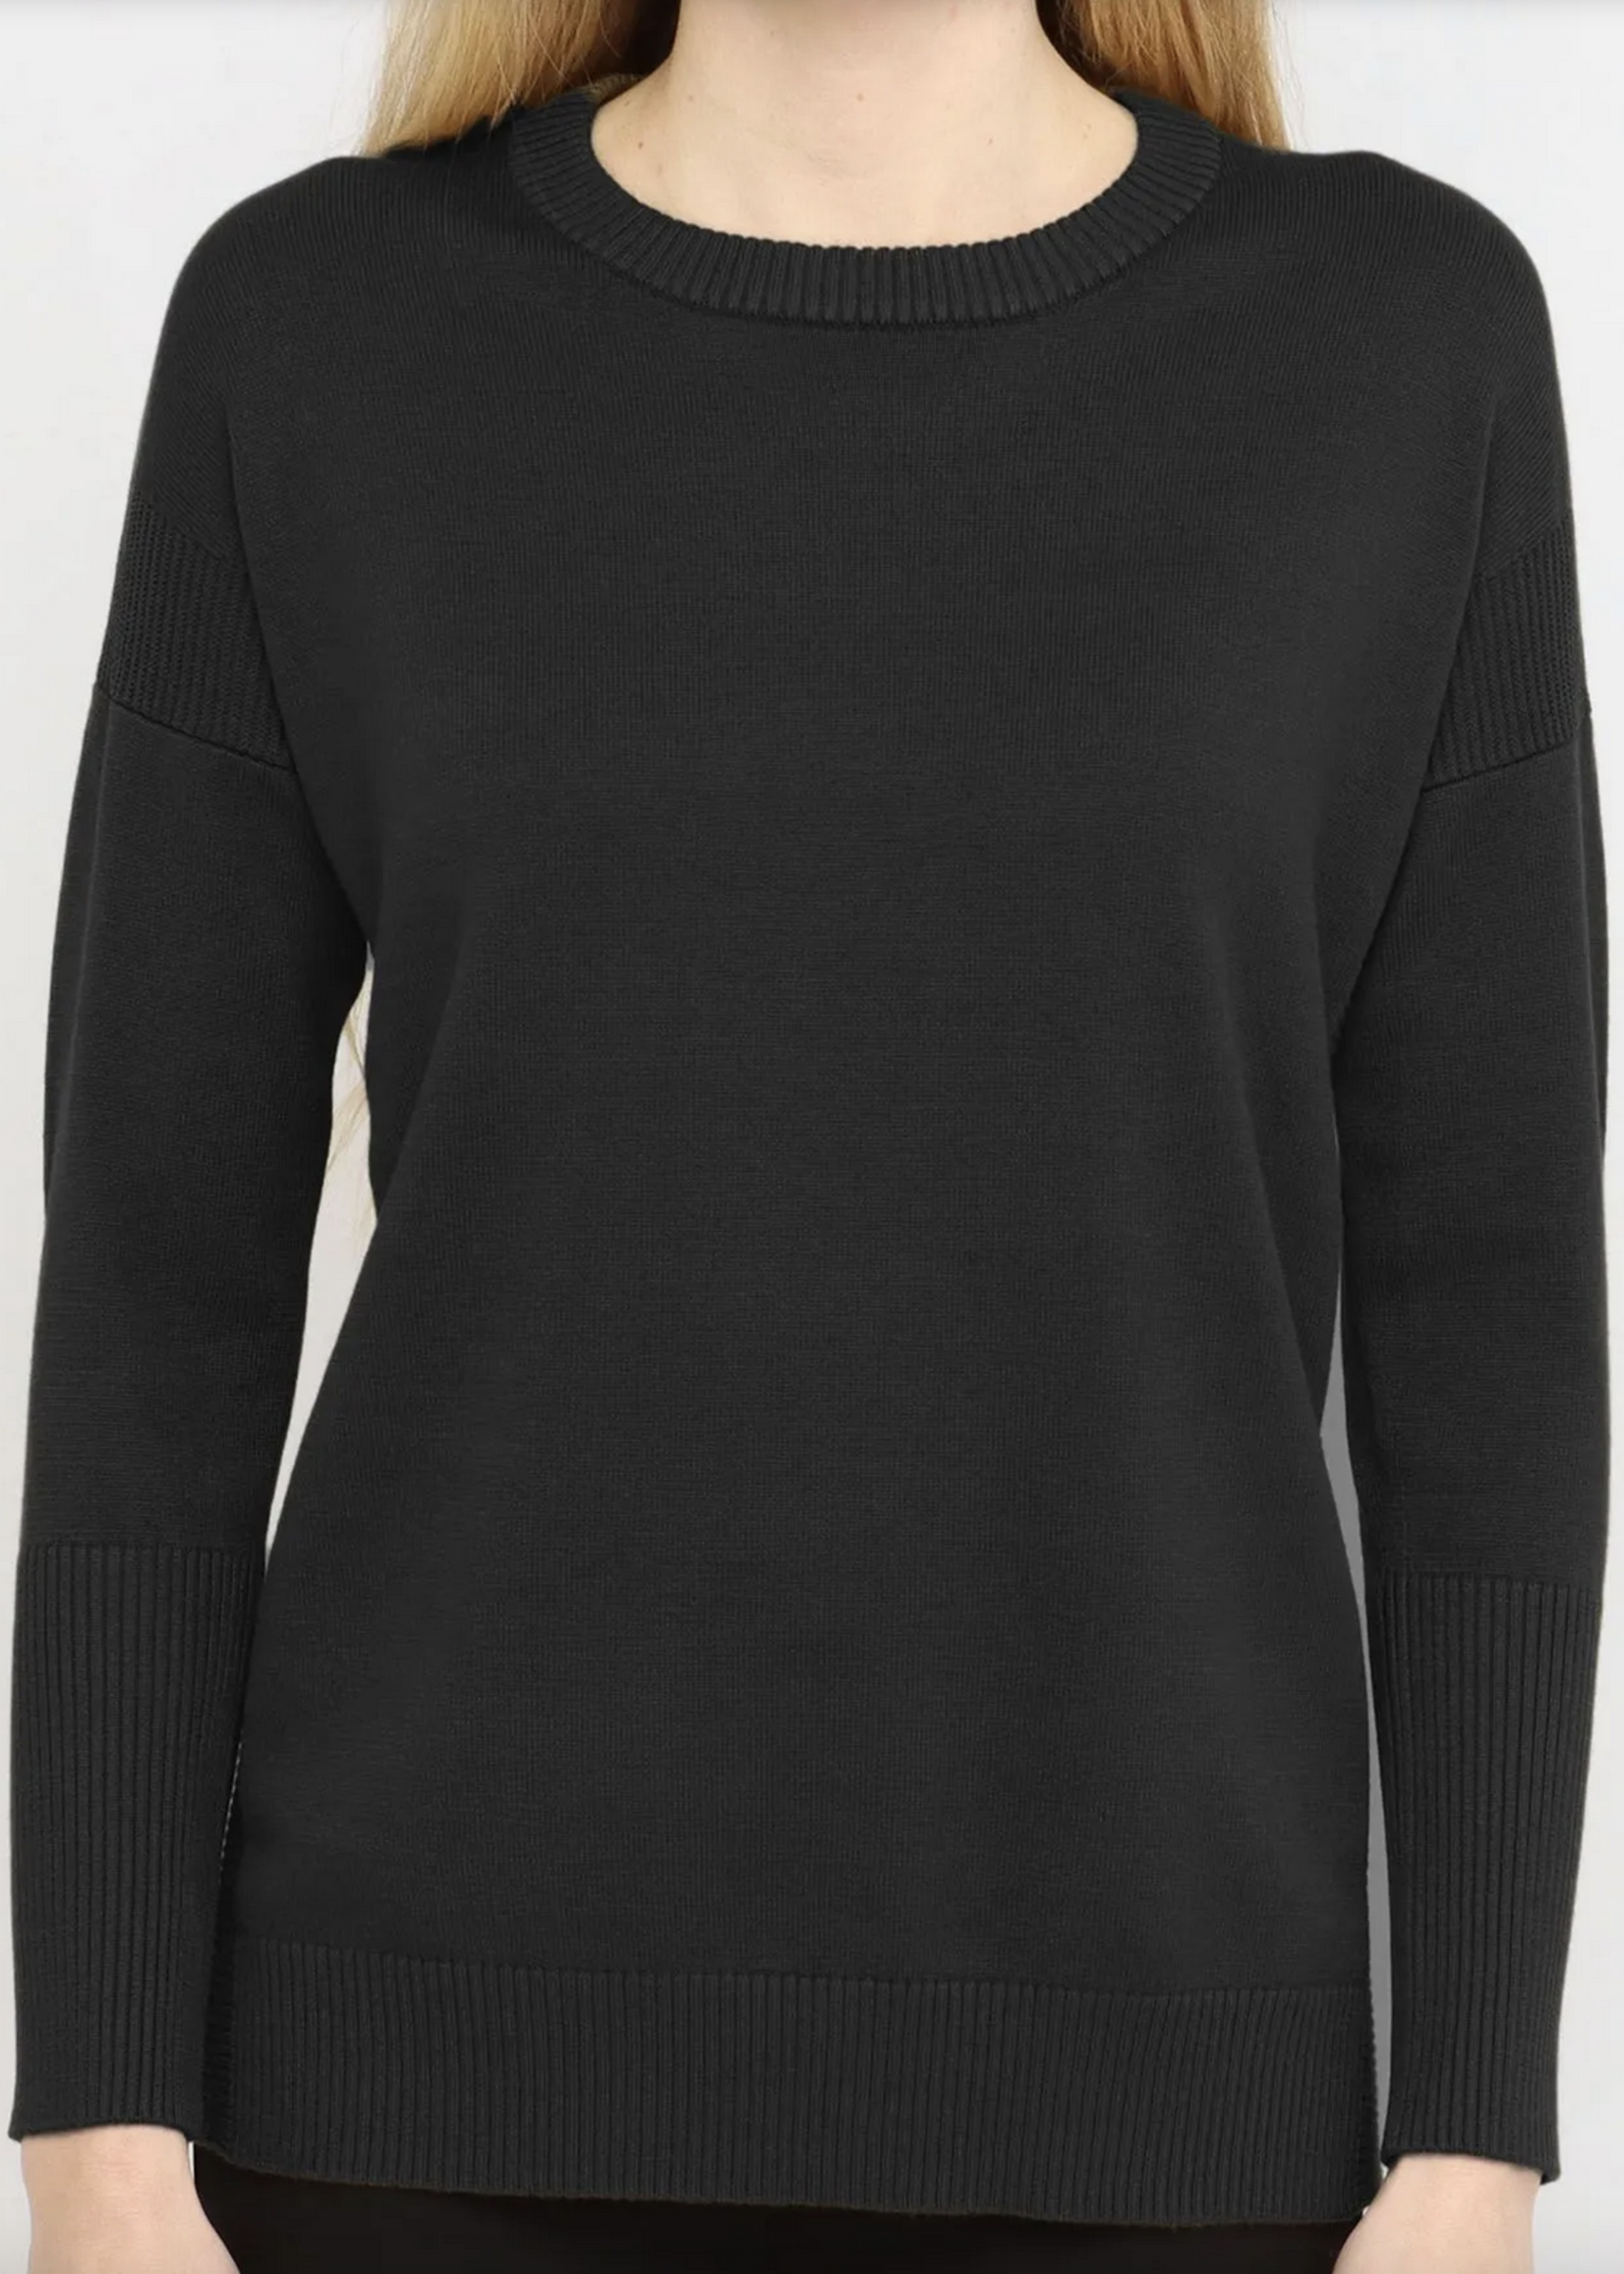 CREW NECK PULLOVER W/ SIDE SLITS